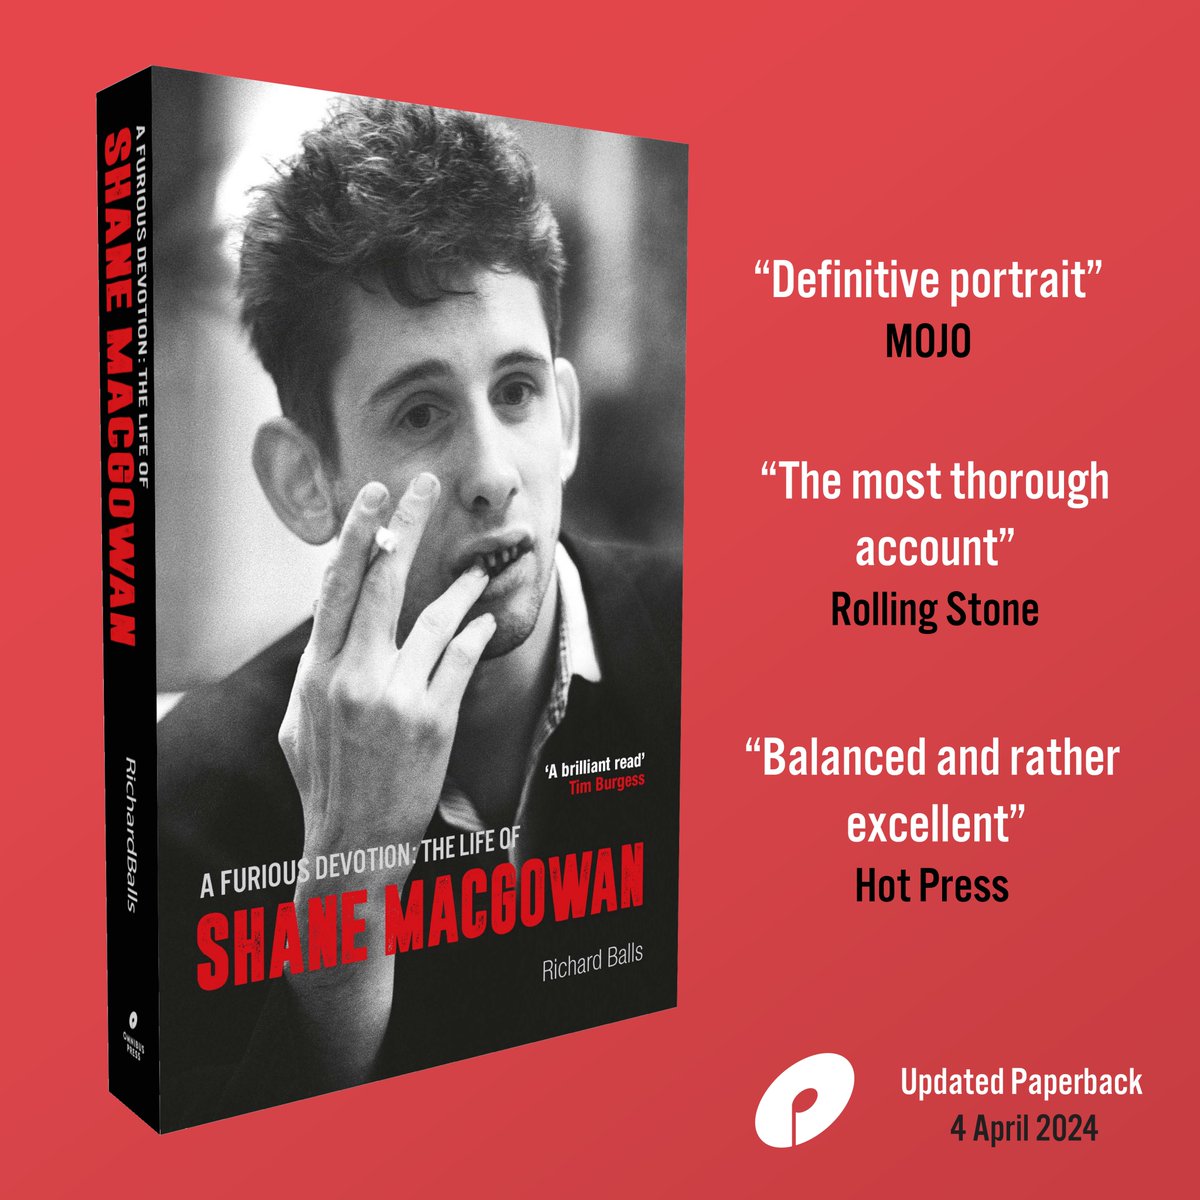 A fully updated paperback edition of @RichardBalls' highly acclaimed biography of Shane MacGowan is coming in April Pre-order link below 👇